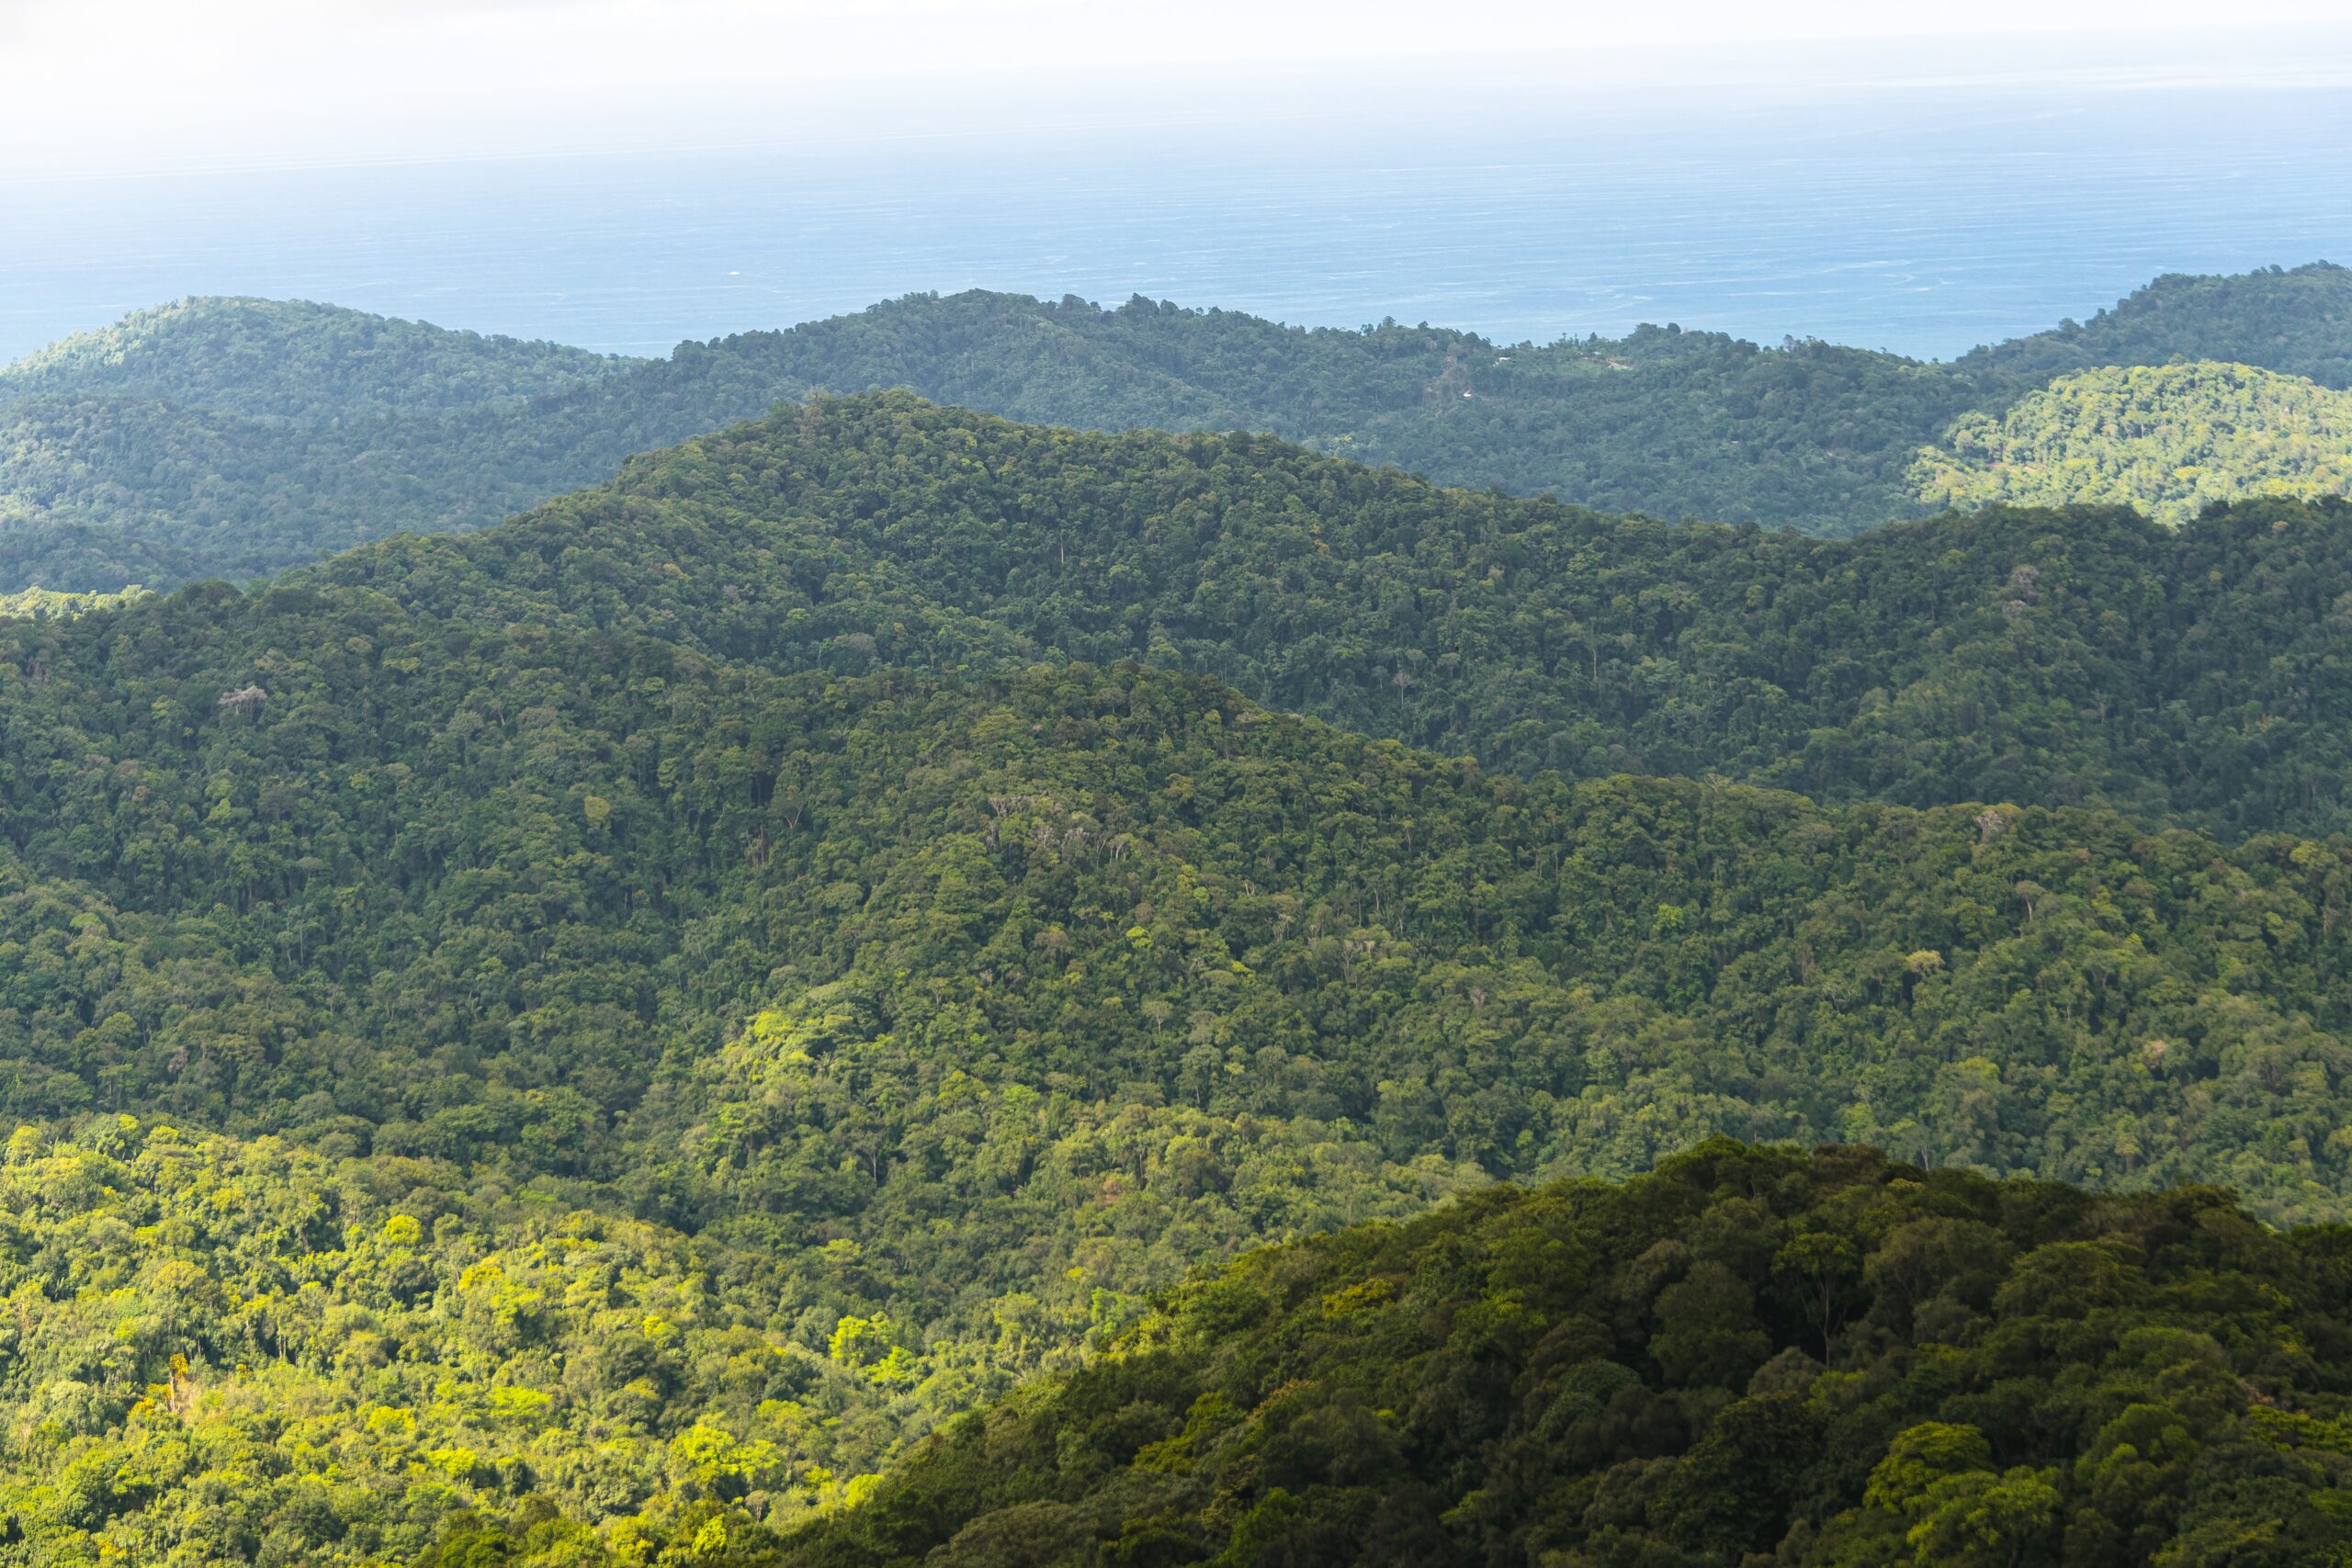 Hazy view over undulating Northern Range mountain in Las Lapas, Blanchisseuse Road Trinidad with densely vegetated tropical forest and coastline